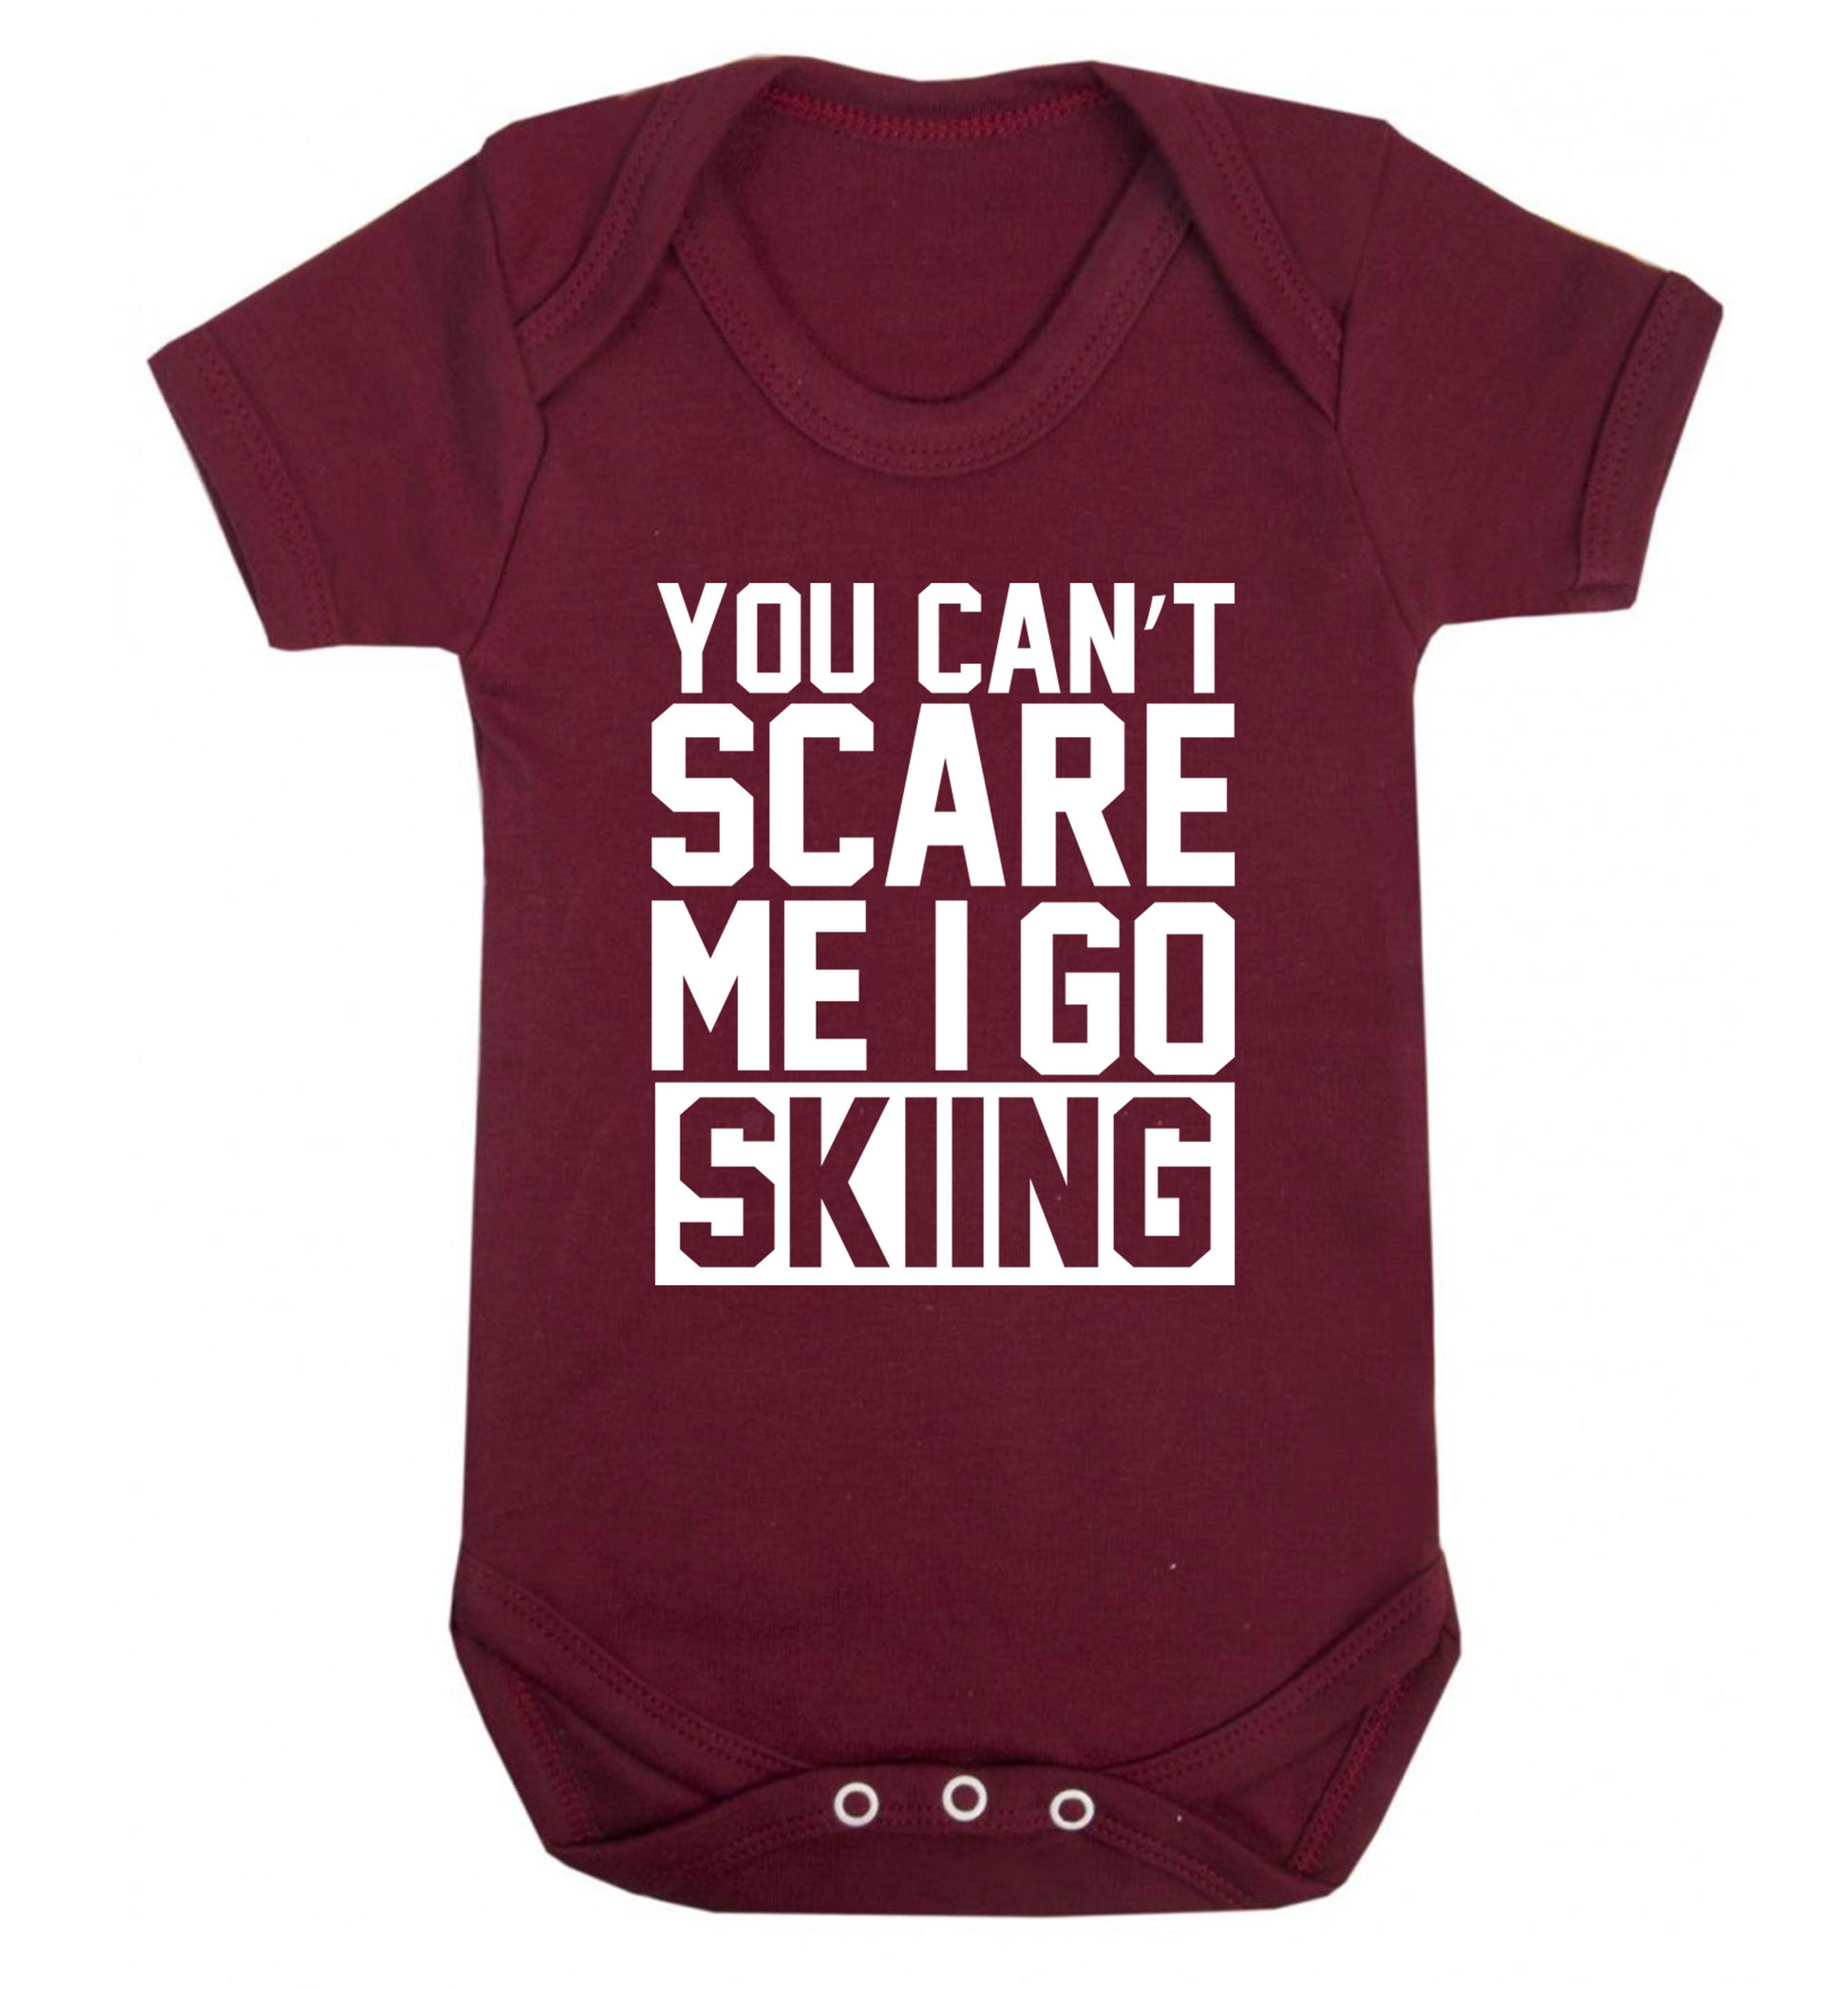 You can't scare me I go skiing Baby Vest maroon 18-24 months